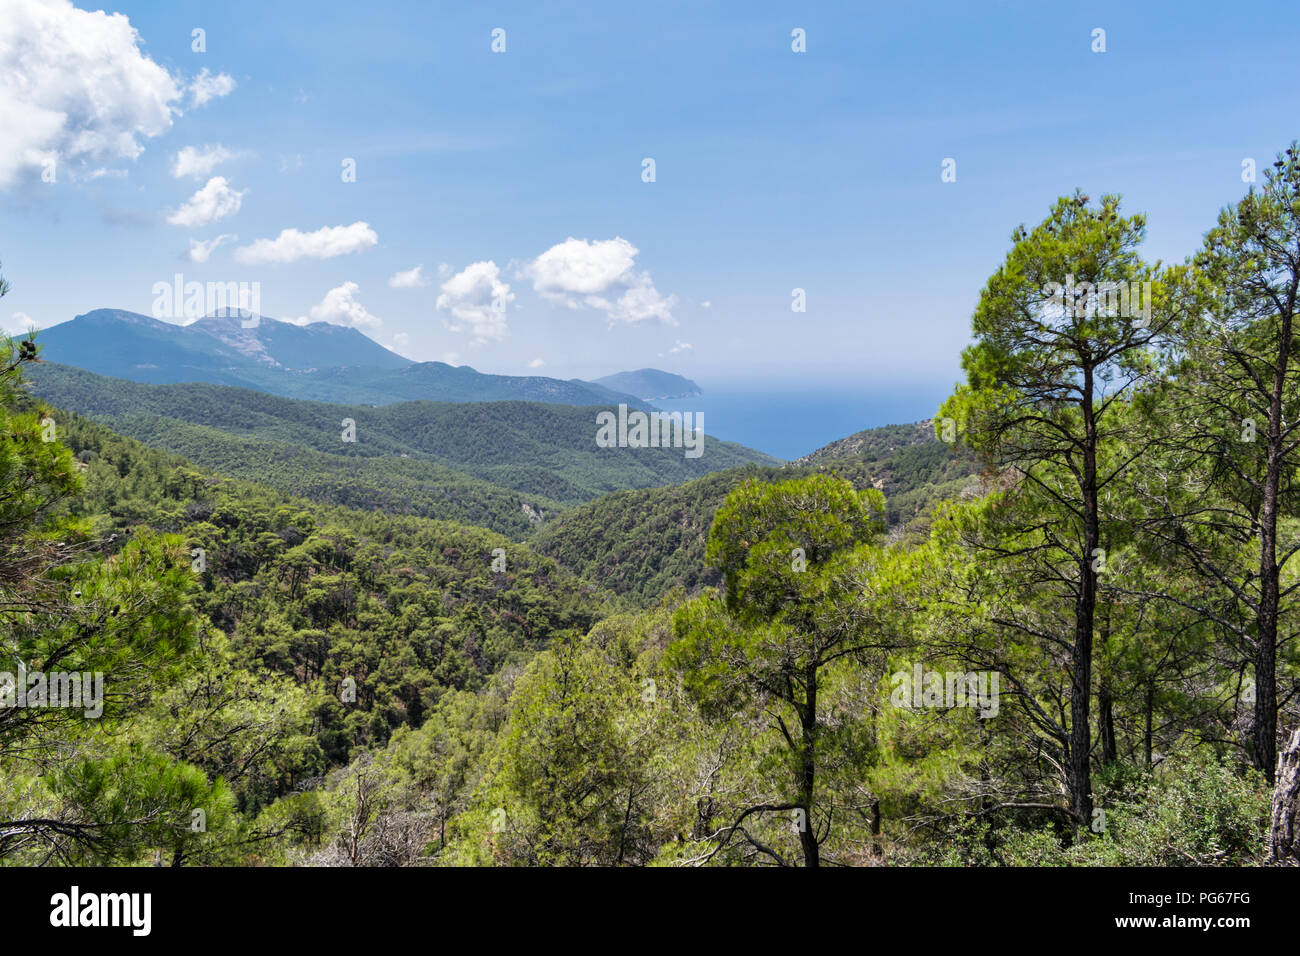 Beautiful Mediterranean Sea With Clear Turquoise Water And Pine Trees Stock  Photo - Image of greece, green: 223913666